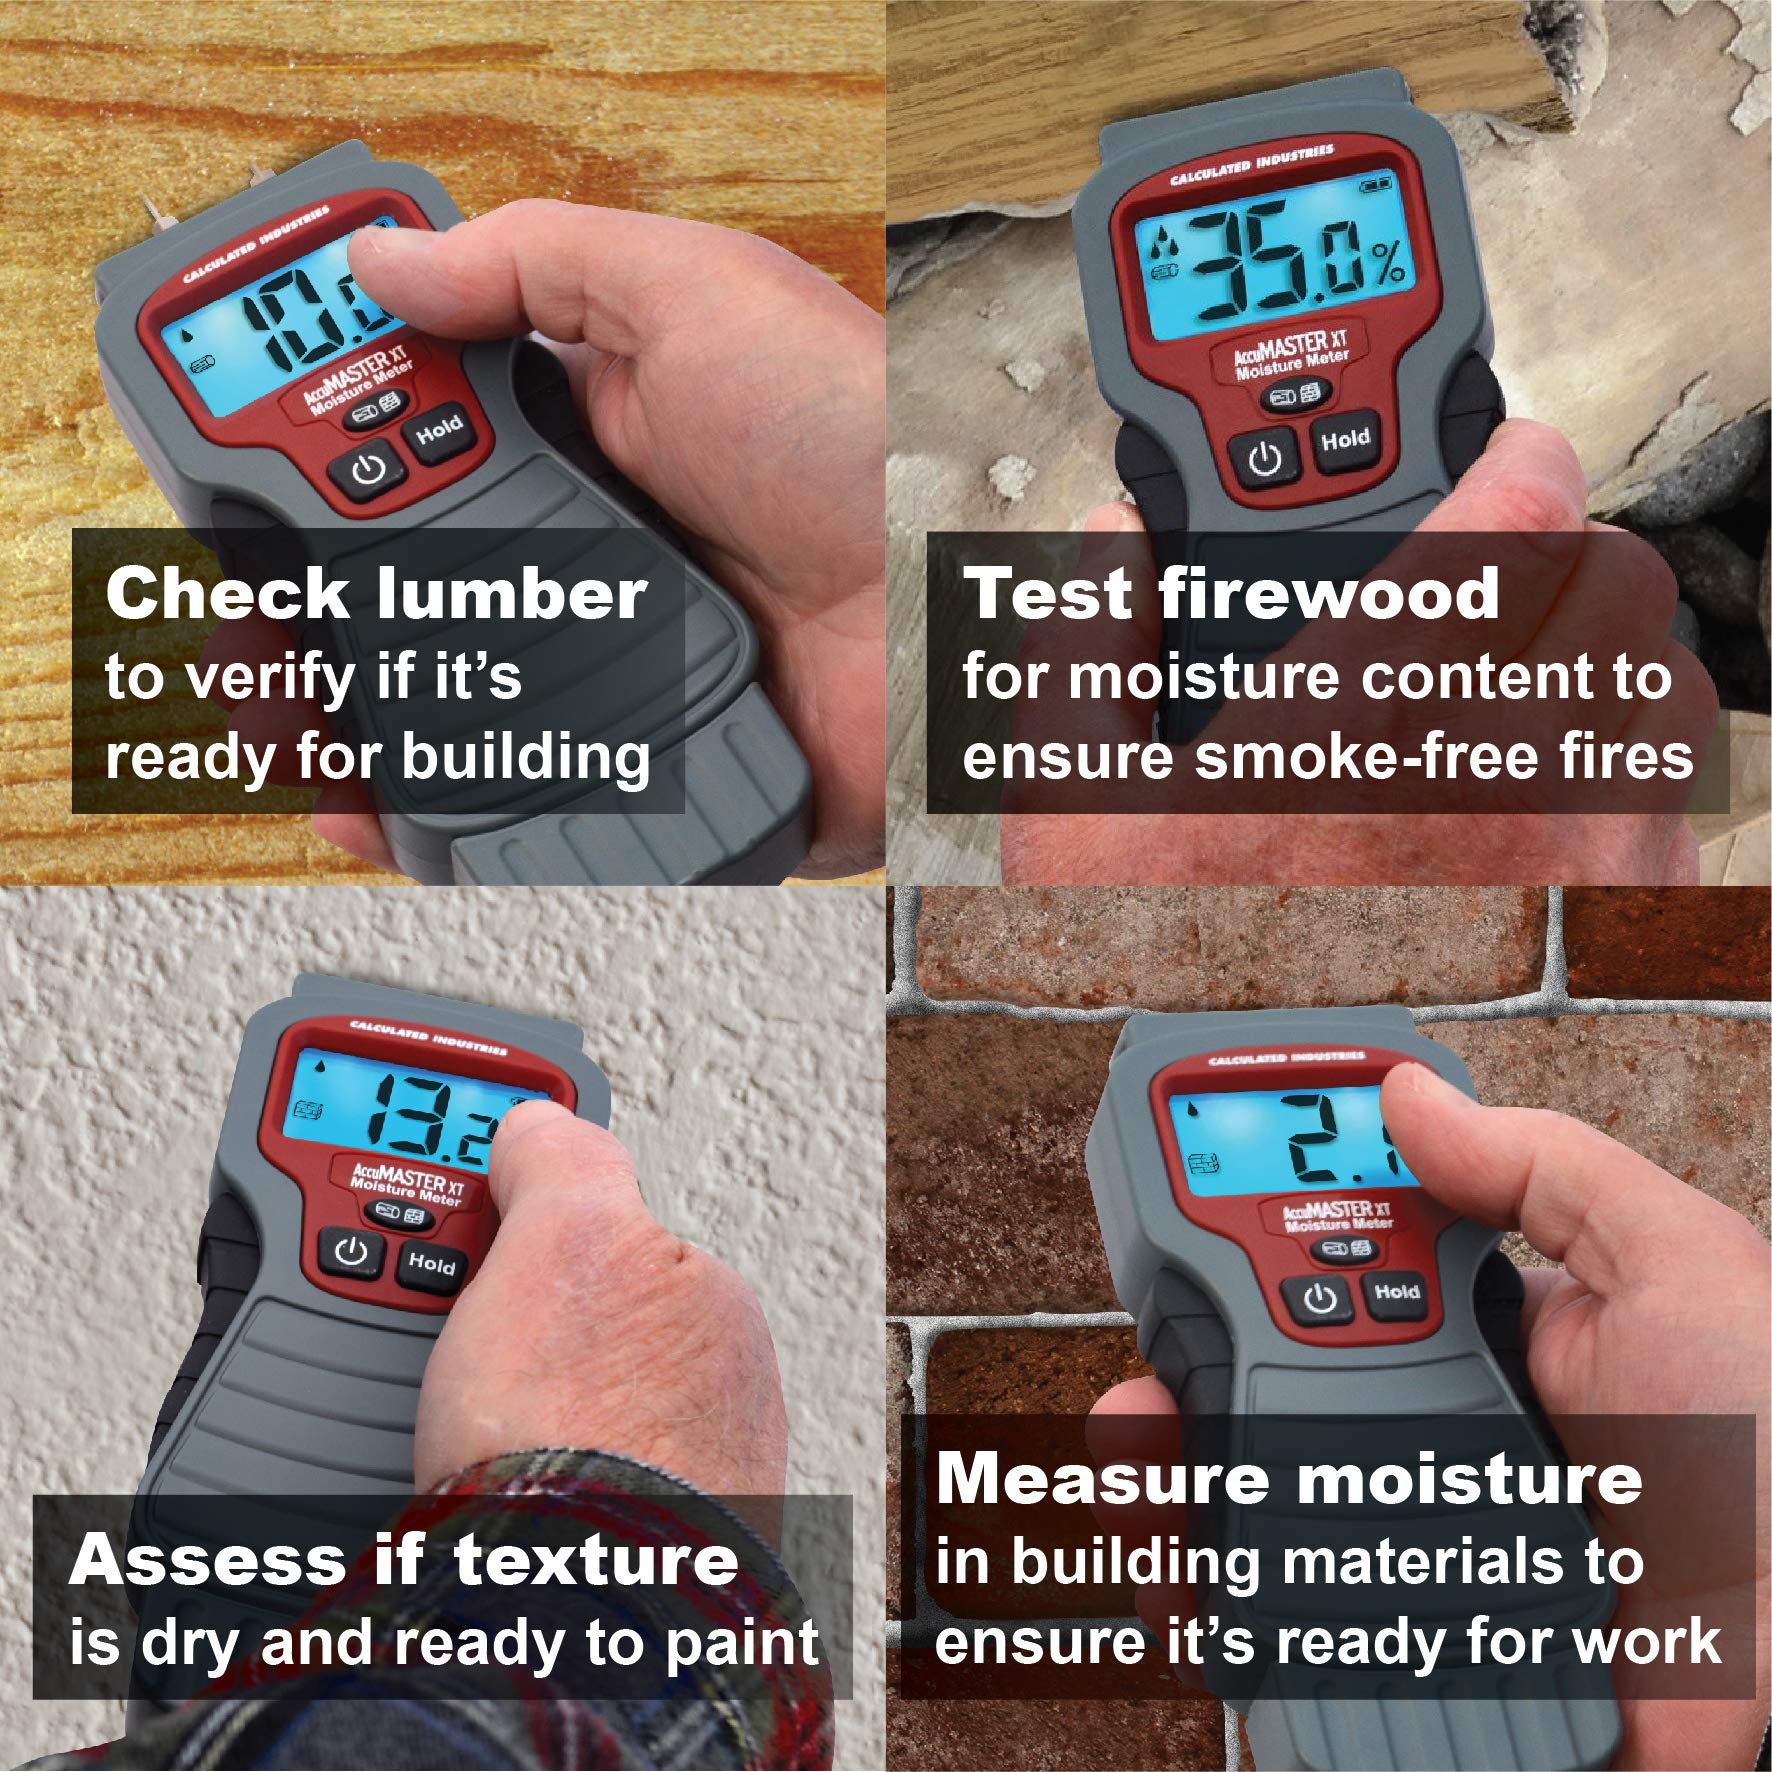 Calculated Industries 7440 AccuMASTER XT Digital Moisture Meter | Handheld |Pin Type | Backlit LCD Display | Detects Leaks, Damp and Moisture in Wood, Walls, Ceilings, Carpet and Firewood